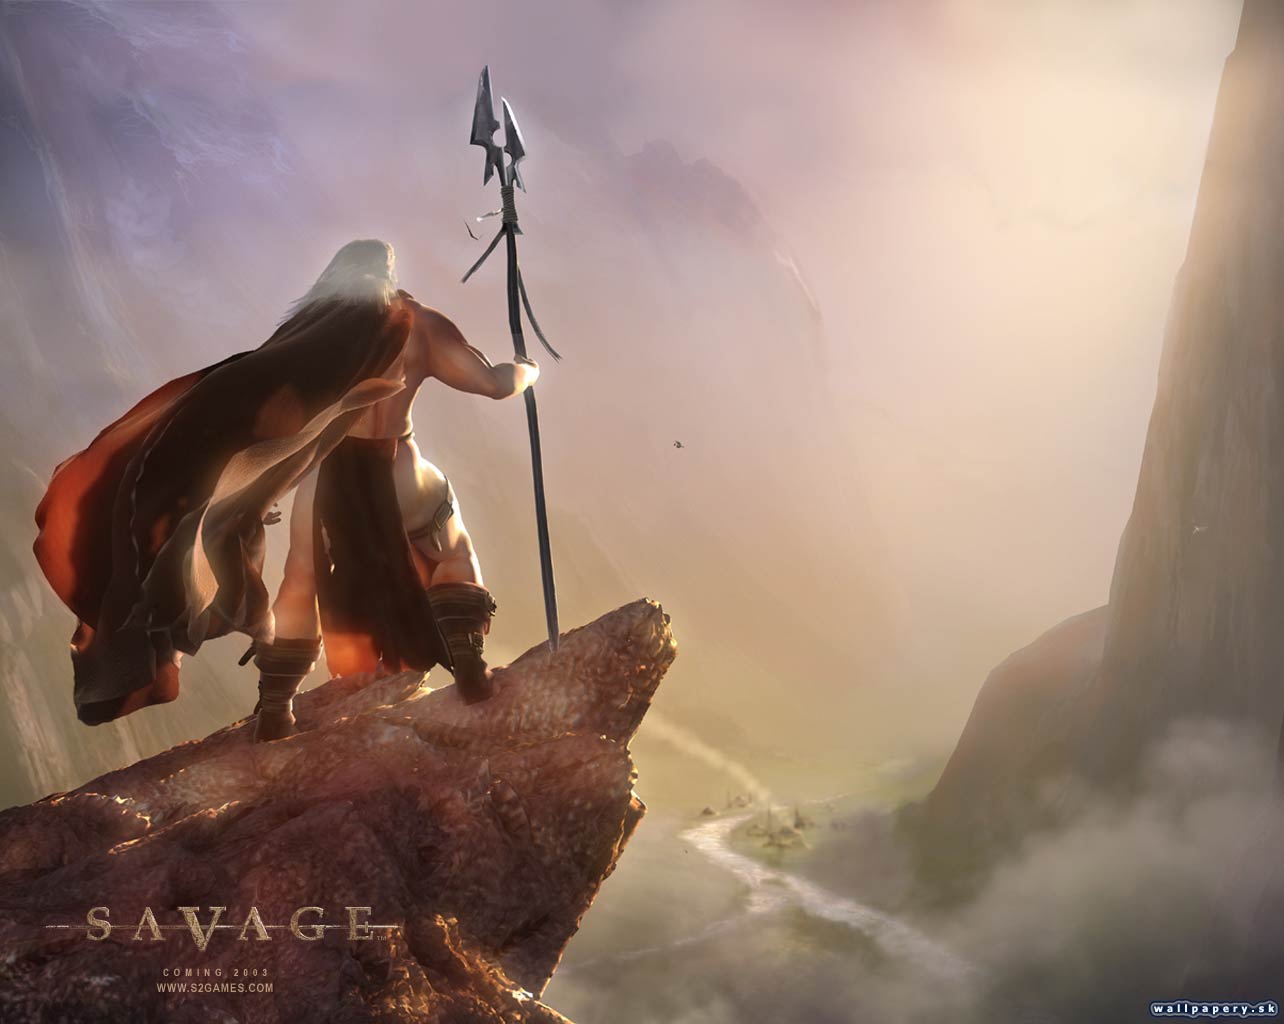 Savage: The Battle for Newerth - wallpaper 1